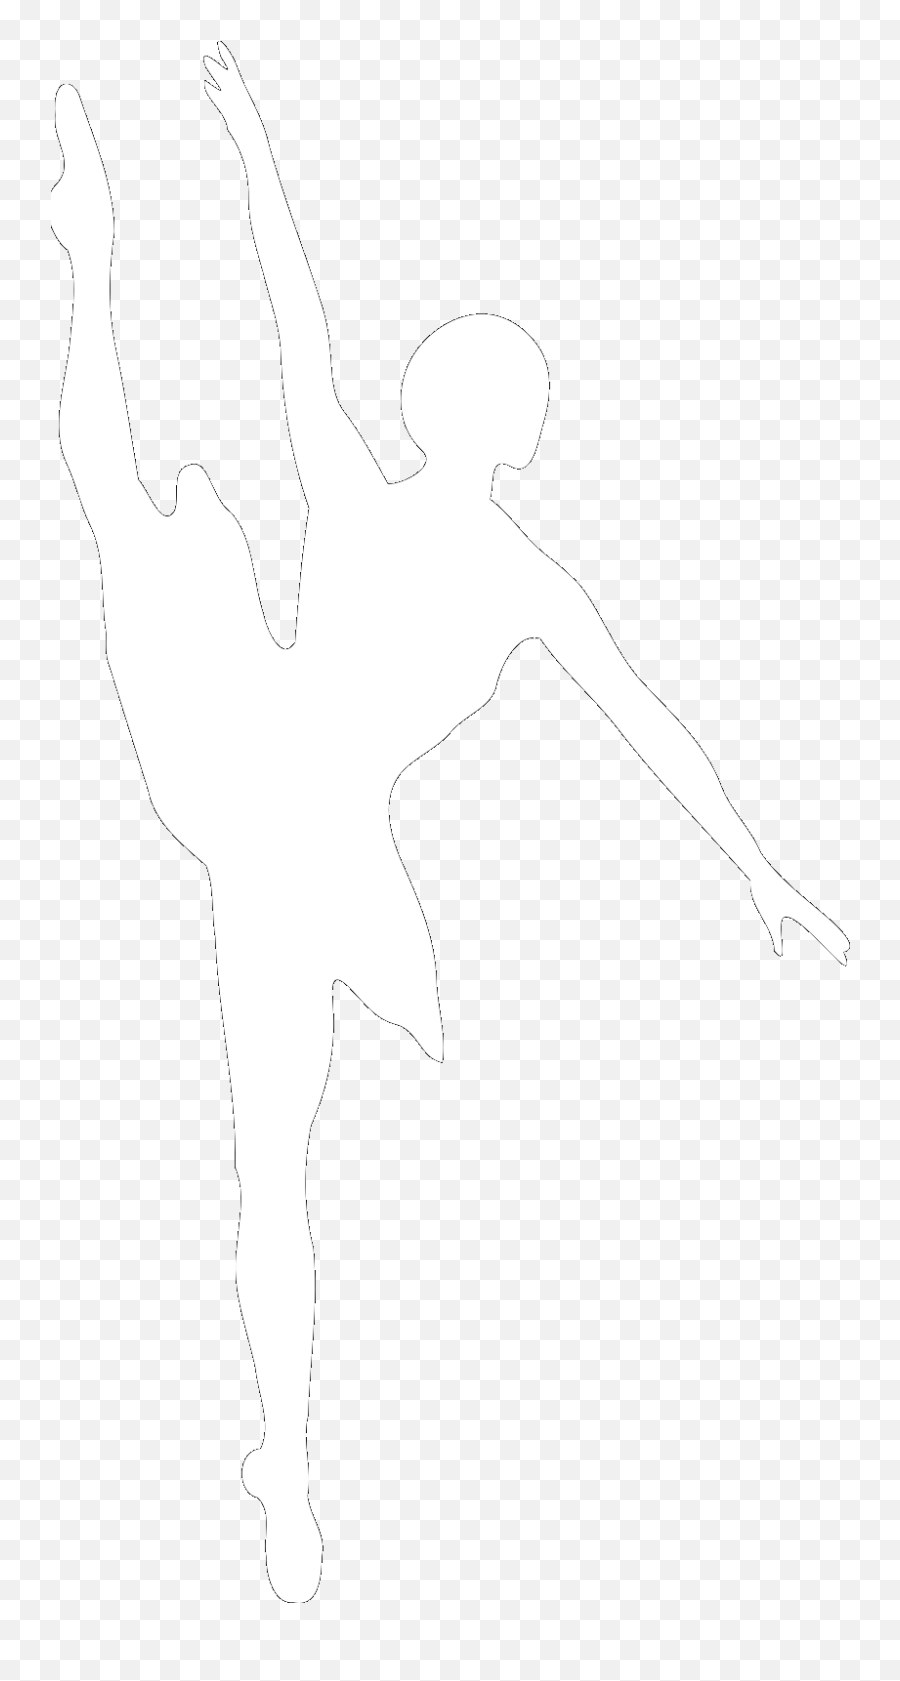 Black And White Ballerina Svg Vector Black And White Emoji,Dancer Clipart Black And White